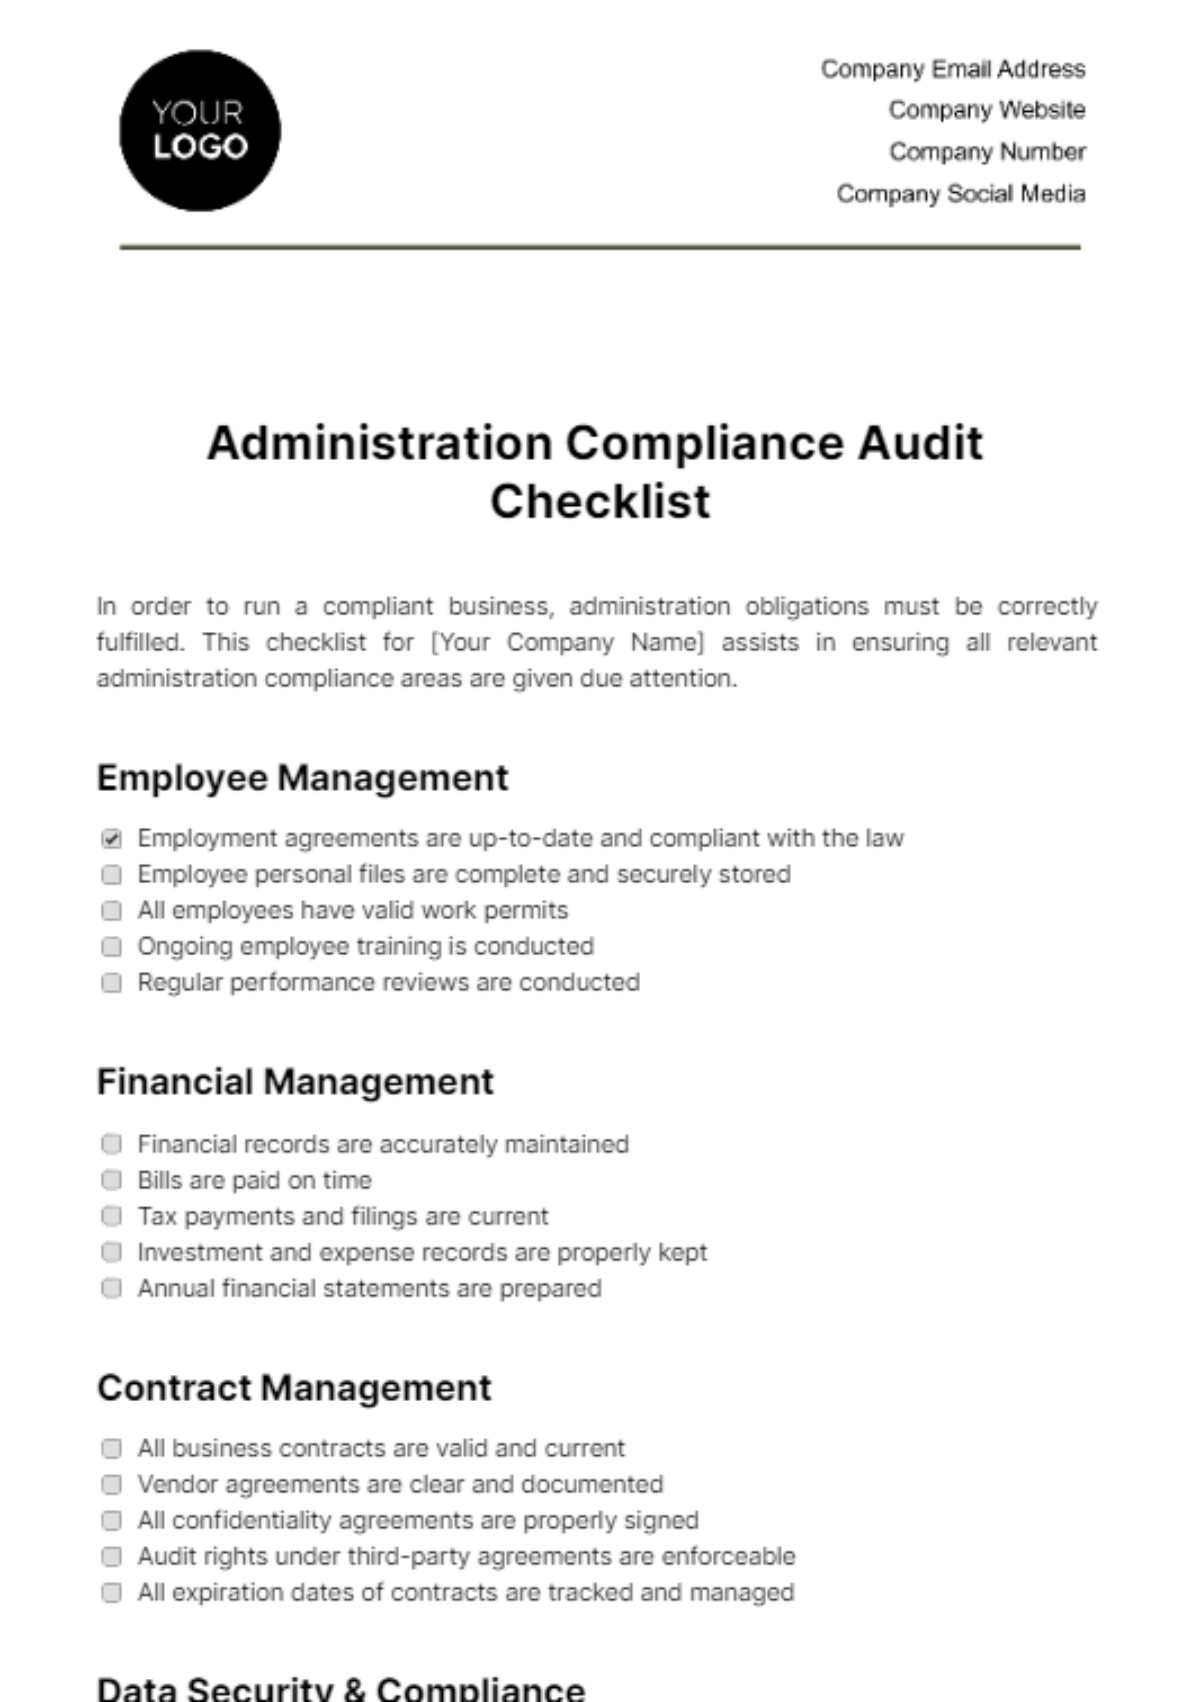 Administration Compliance Audit Checklist Template